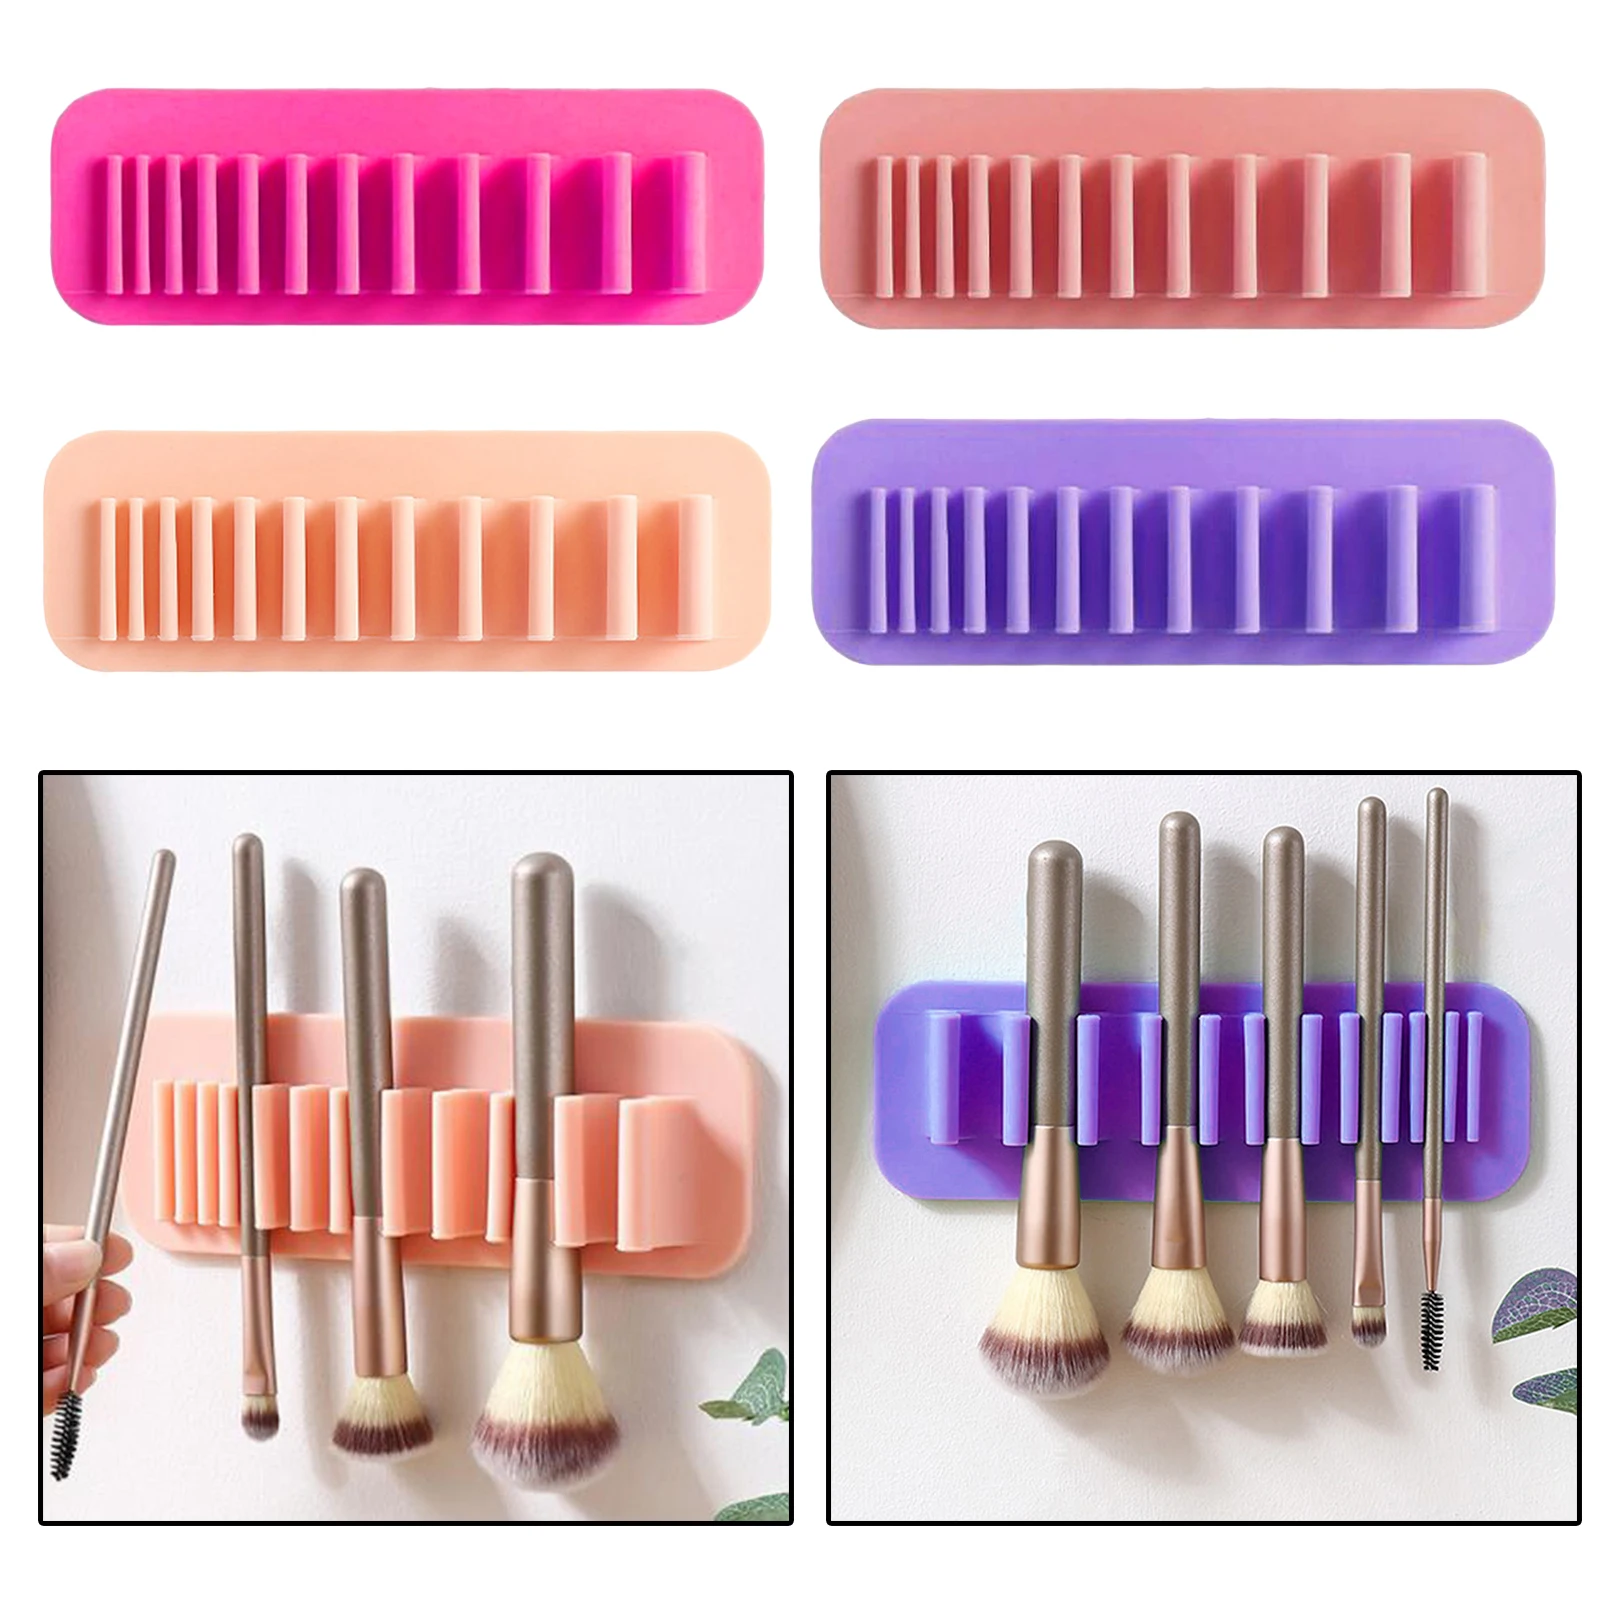 Silicone Wall Mount Makeup Brush Holder Storage Stand Hanger Case Organizer Thin Paint Brush Drying Art Rack Suction Cup